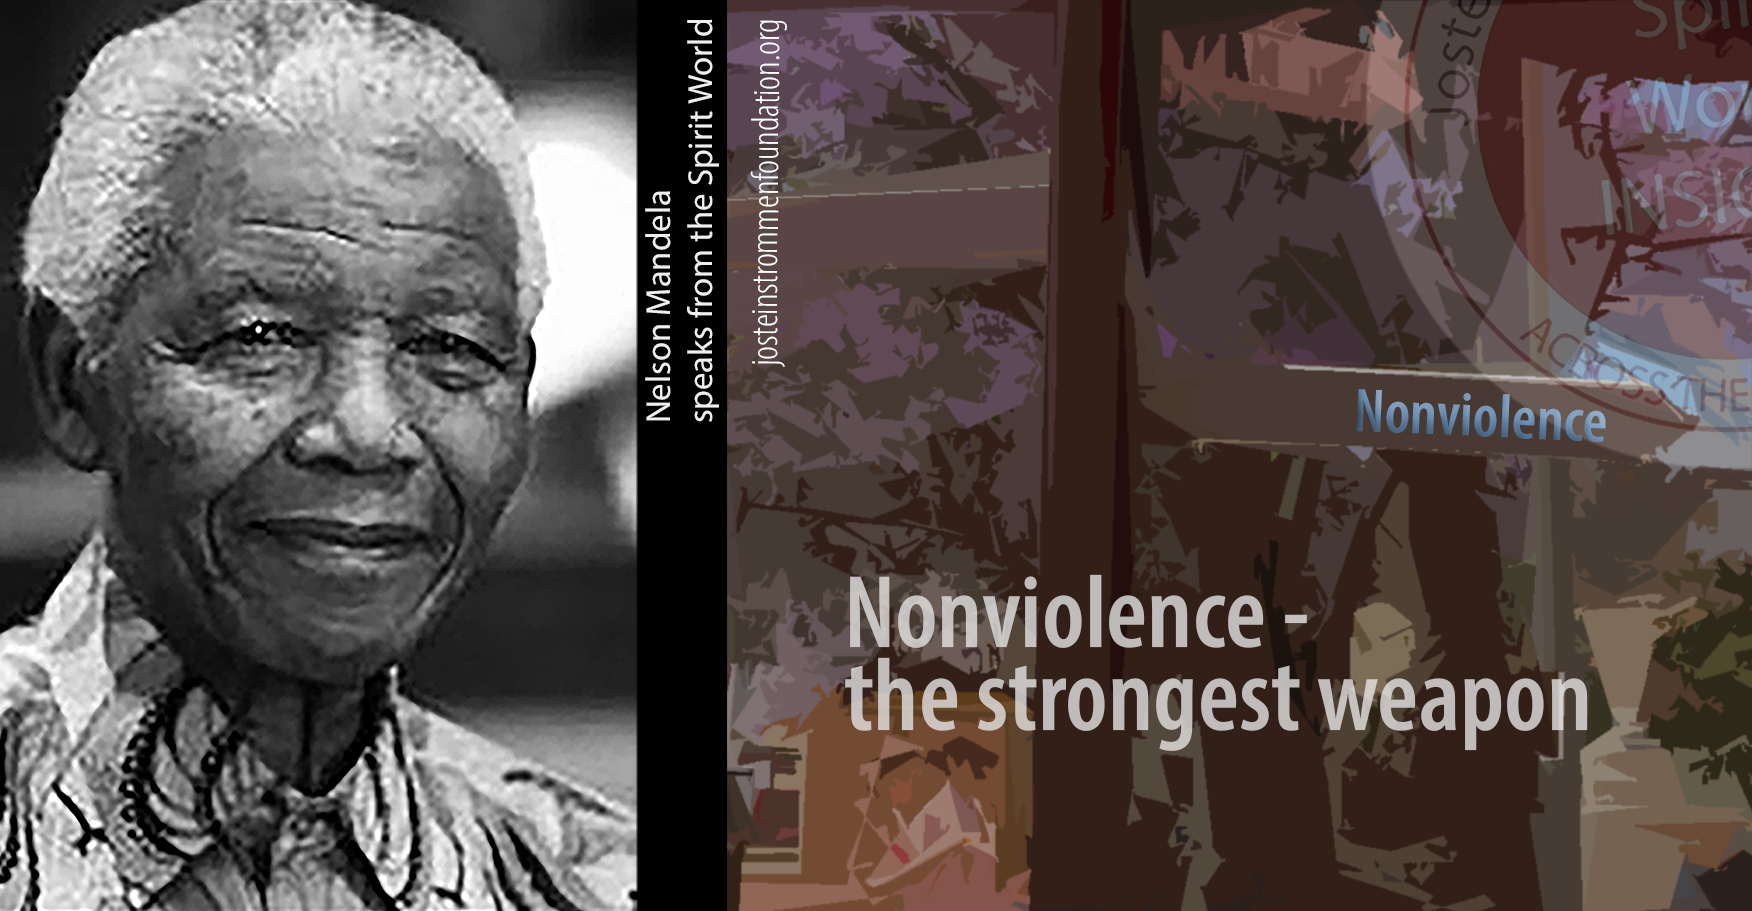 Nonviolence - the strongest weapon